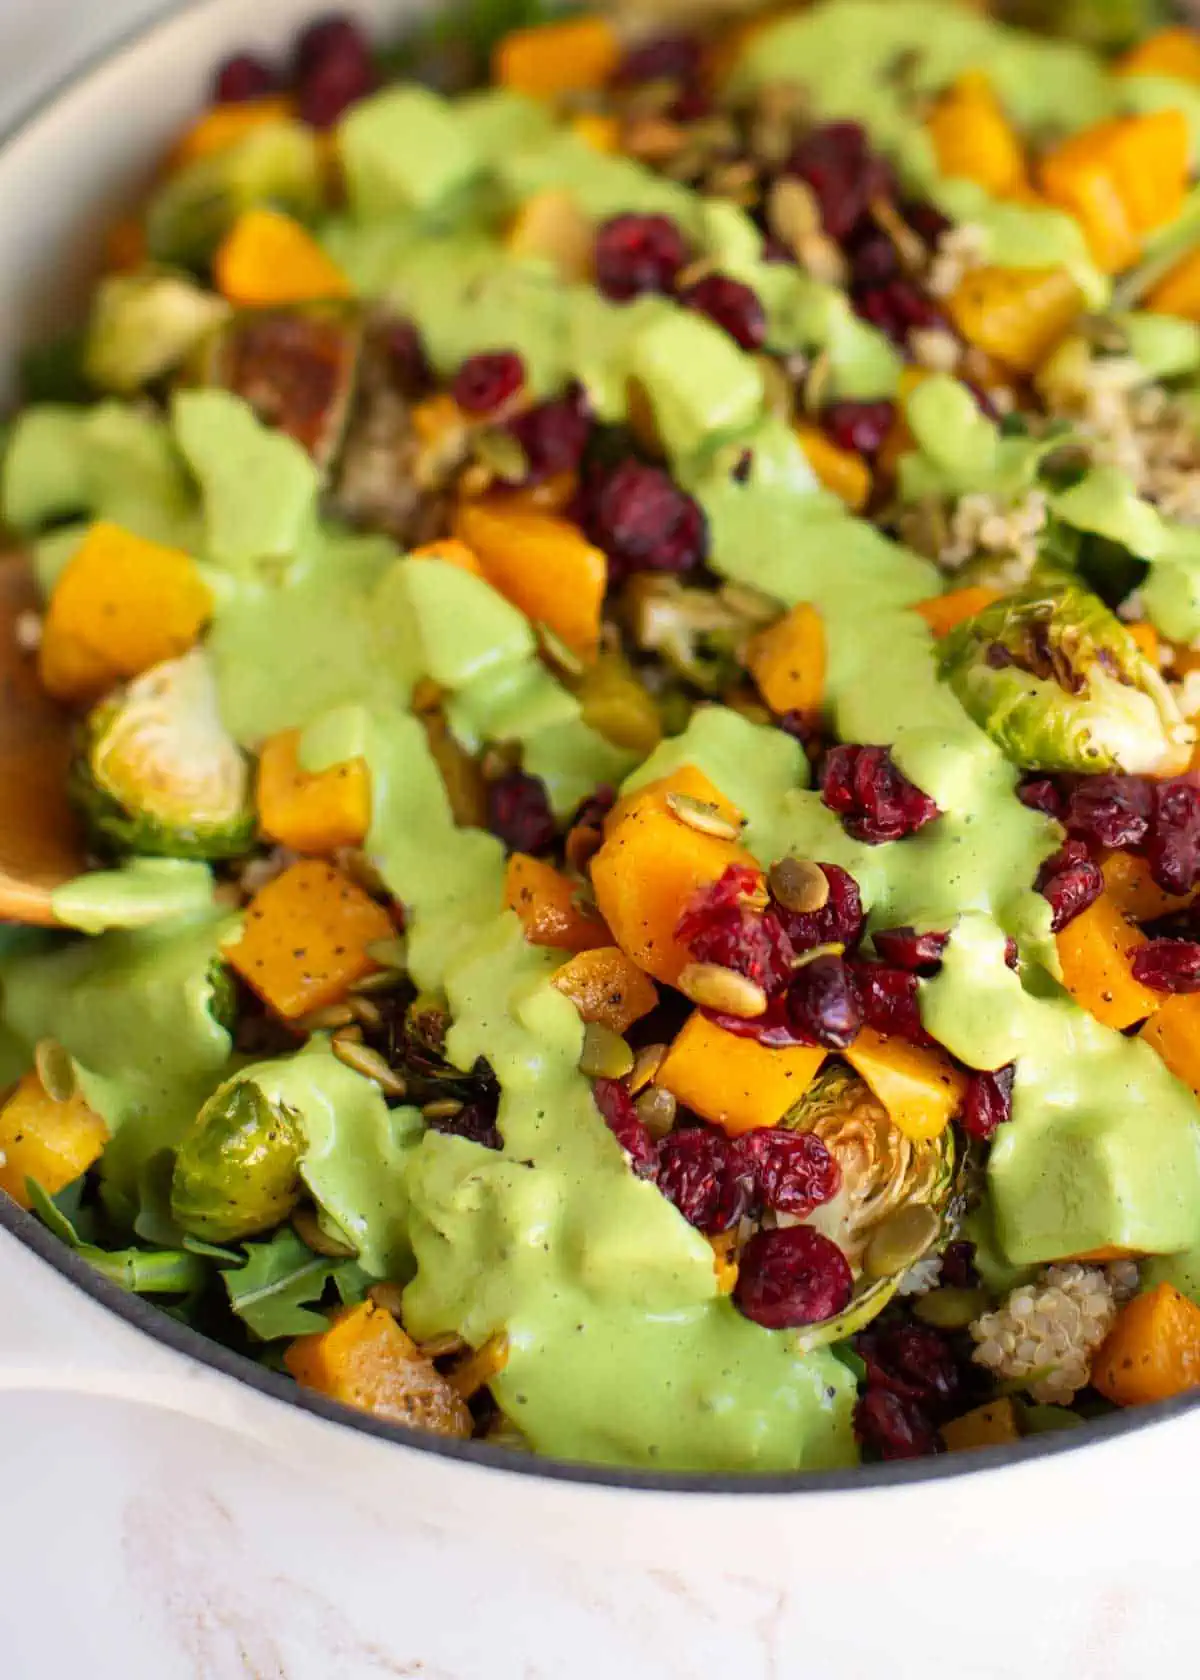 Quinoa salad with arugula, butternut squash, dried cranberries, pepitas, and a drizzle of cashew dill dressing.